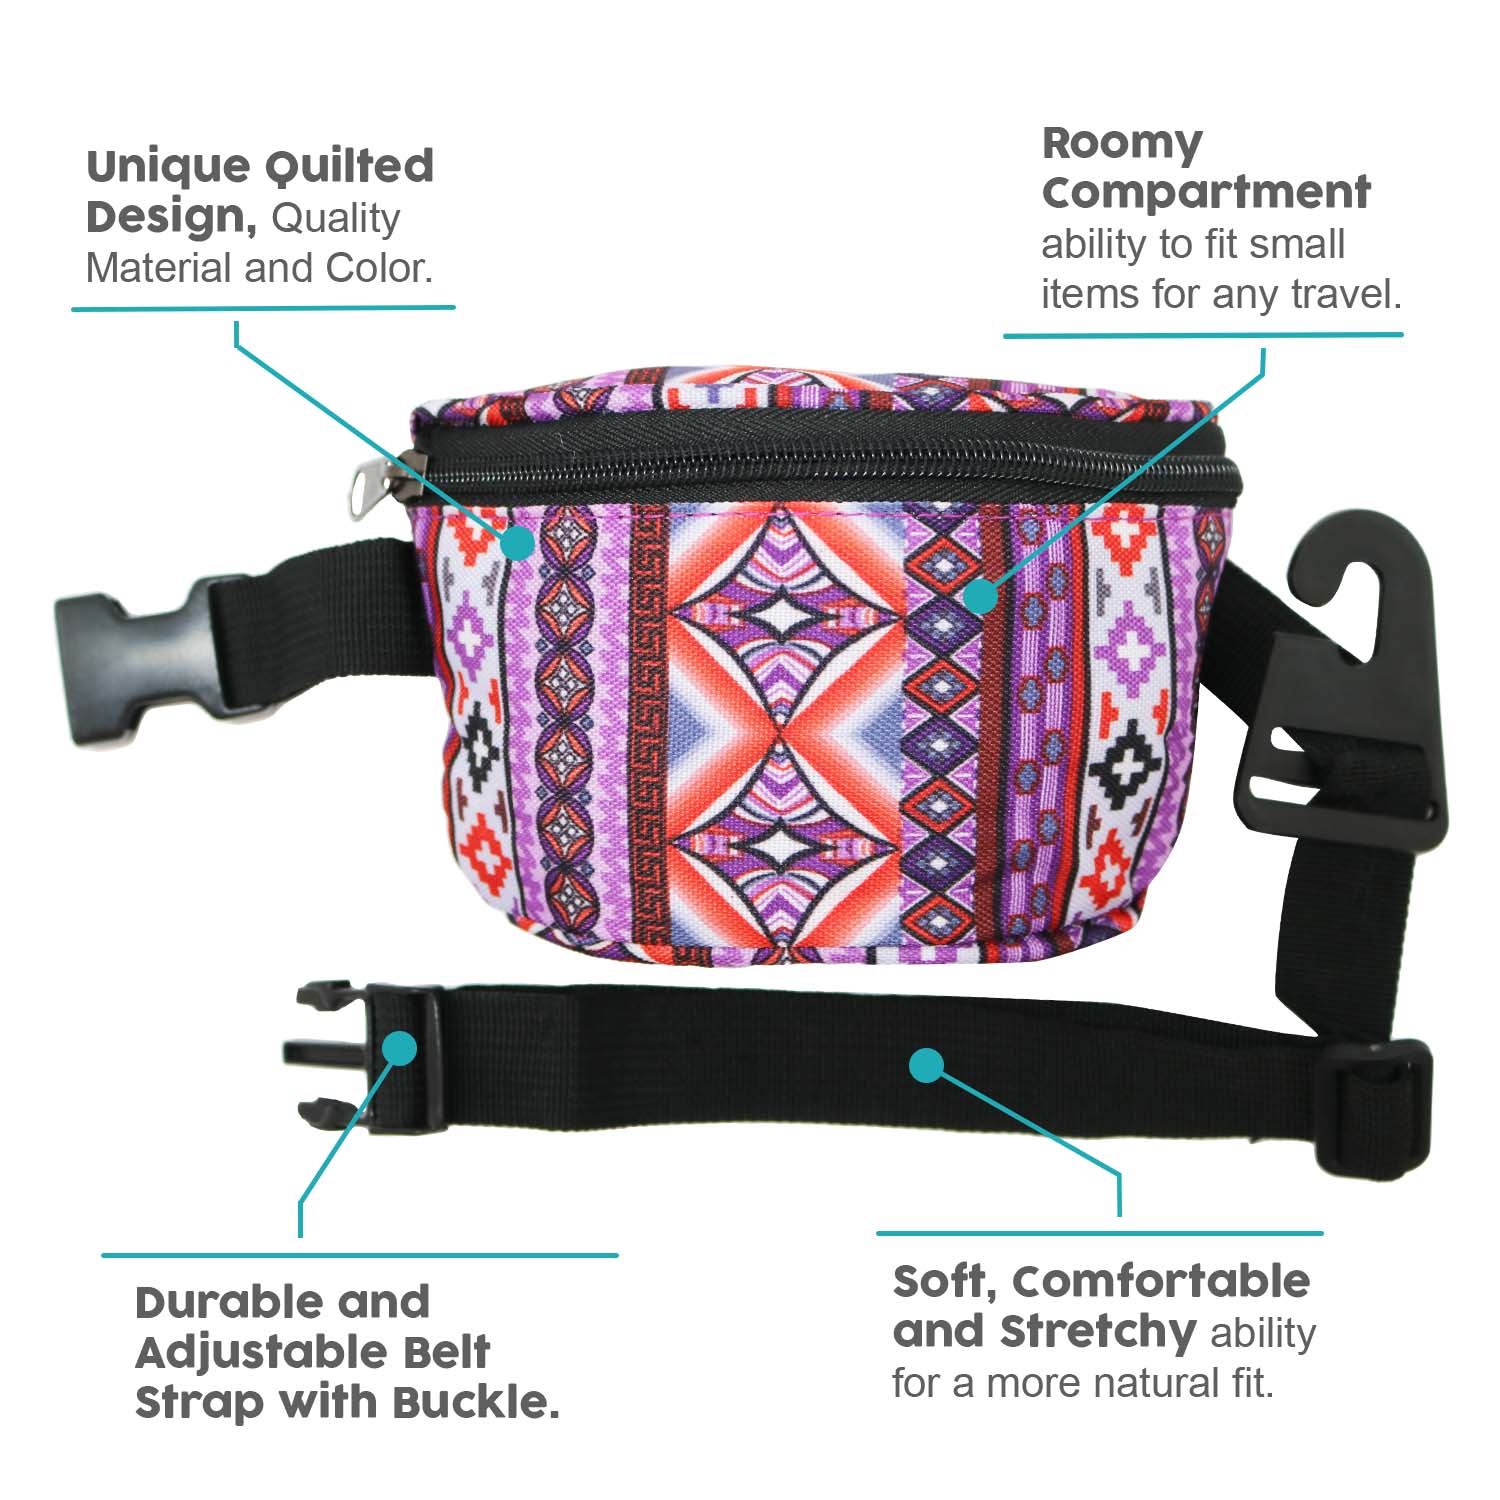 Kids Camouflage Wholesale Fanny Pack in 4 Assorted Designs - Bulk Case of 24